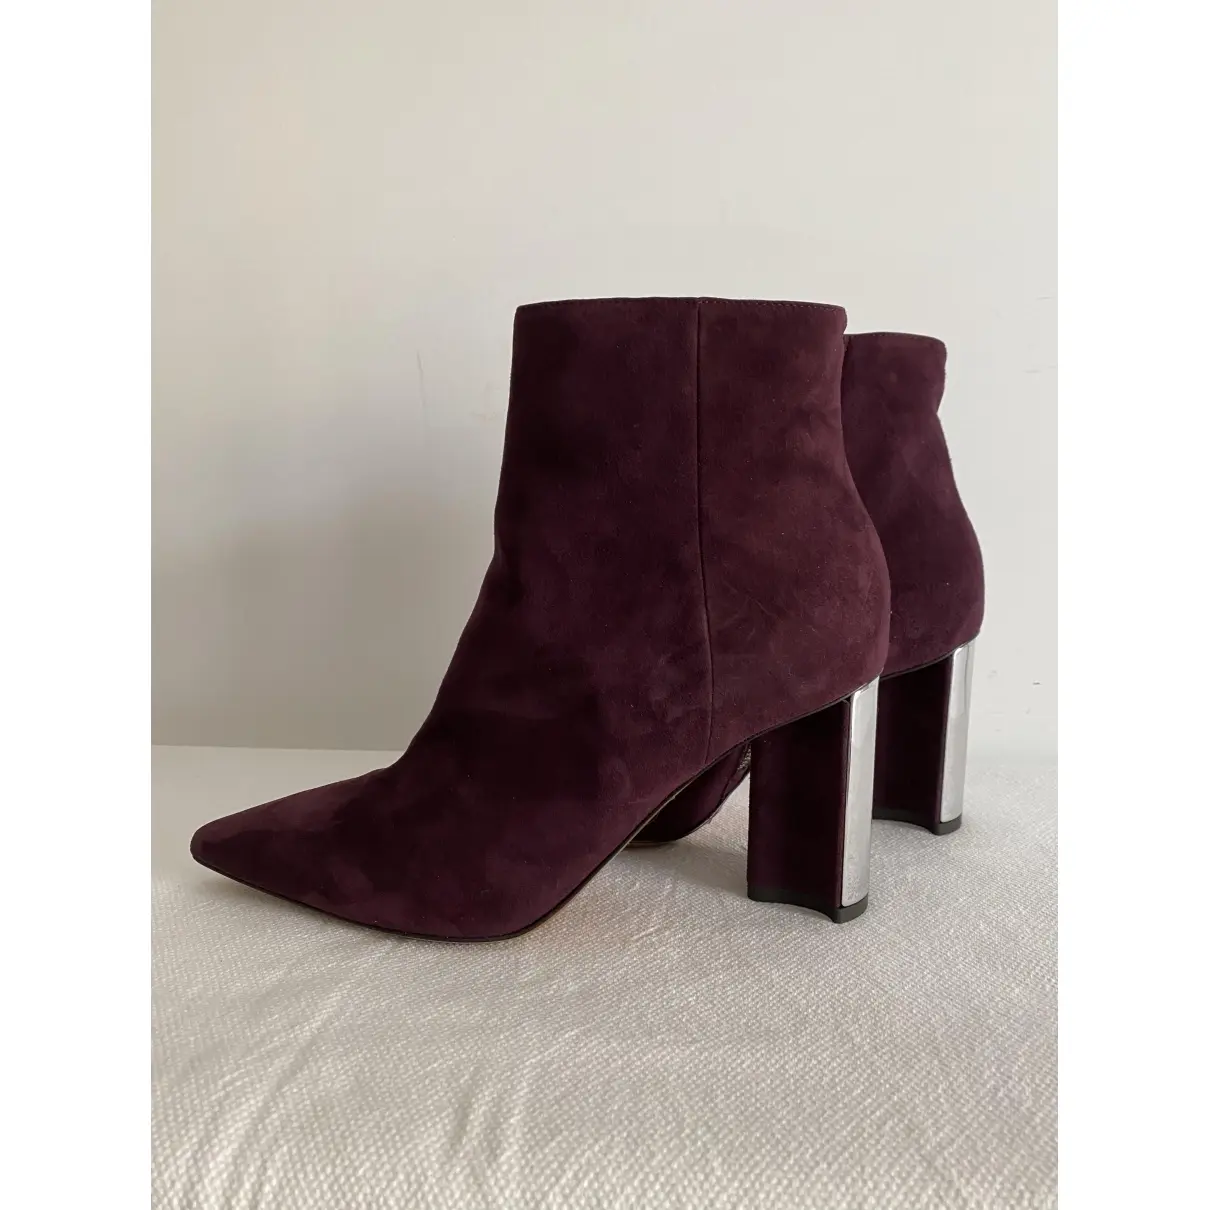 Robert Clergerie Boots for sale